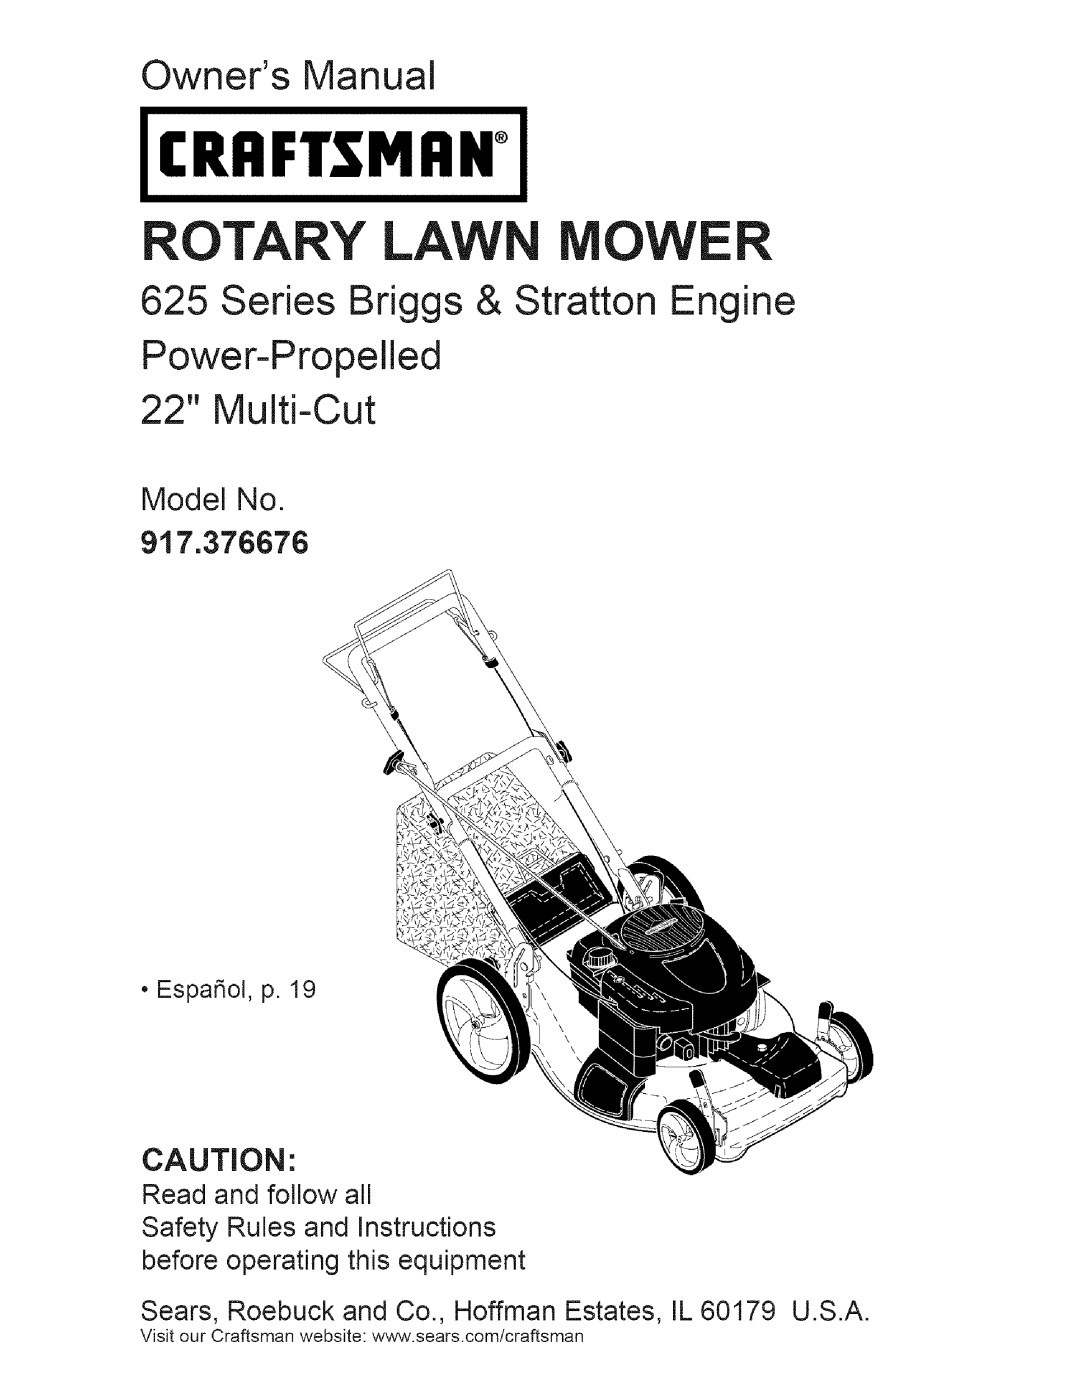 Craftsman owner manual Model No 917.376676, Craftsman, Rotary Mower, Owners Manual, Series Briggs & Stratton Engine 